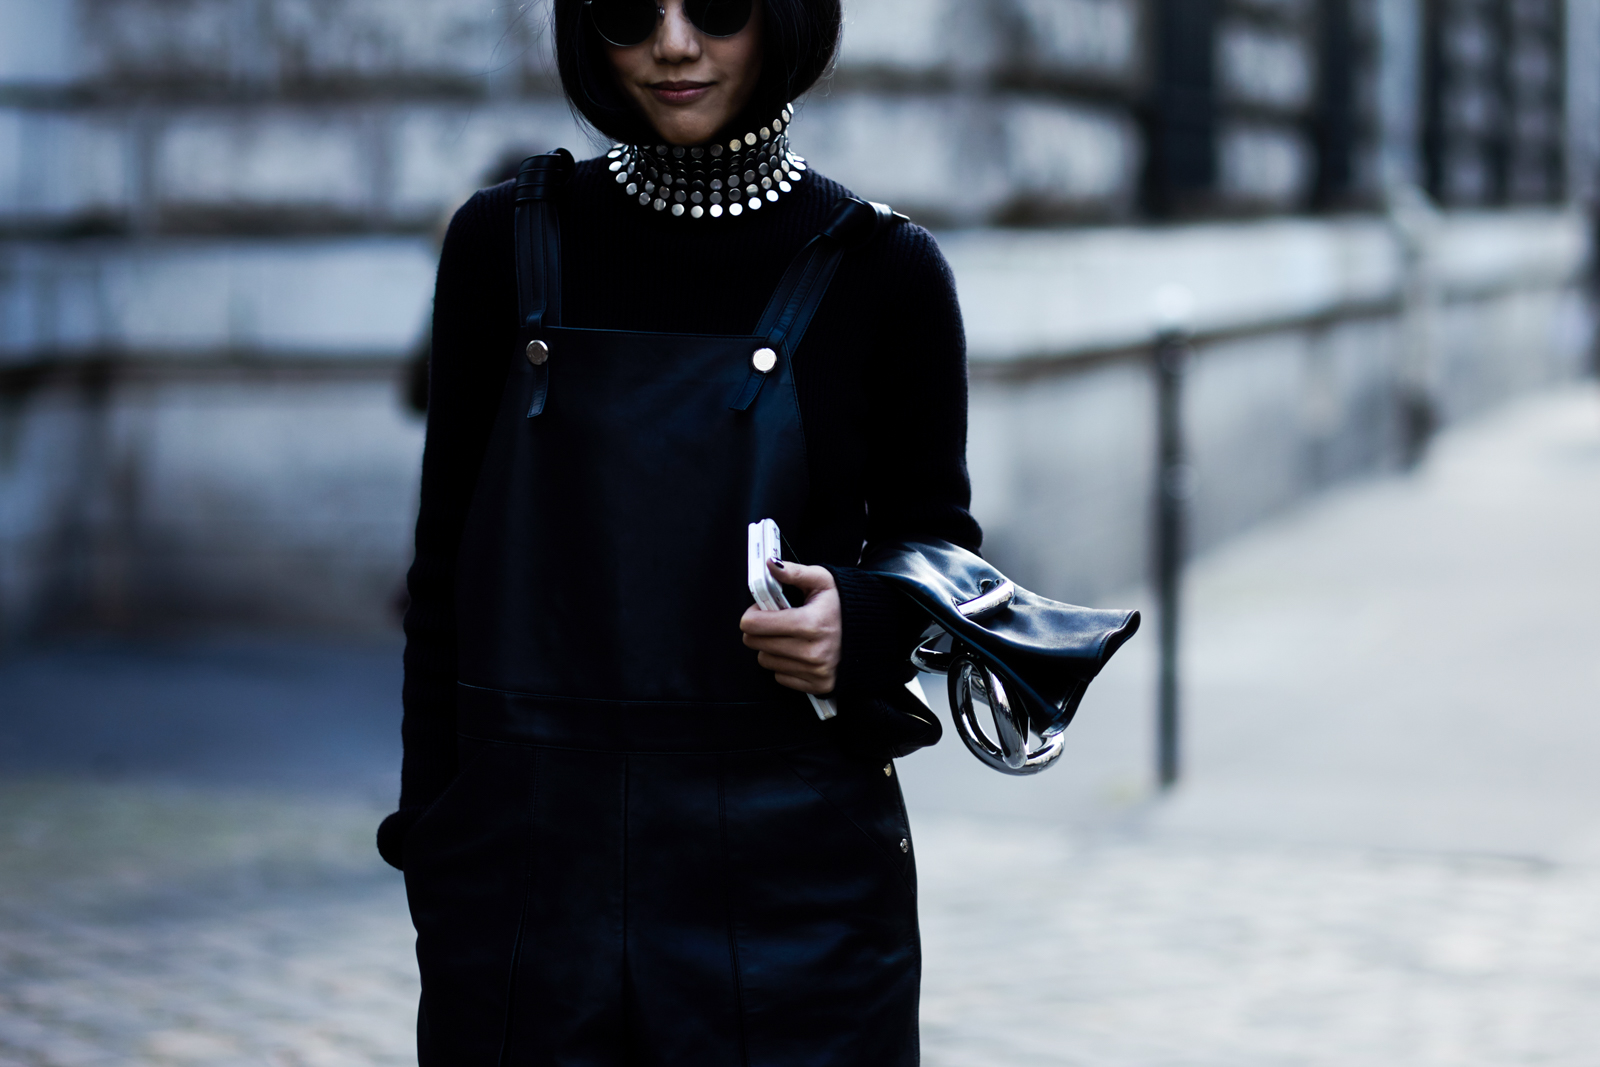 PFW Street Style: Yoyo Cao wearing a studded turtleneck by Alexander Wang, leather overalls and leather bag by J.W Anderson in Paris, France